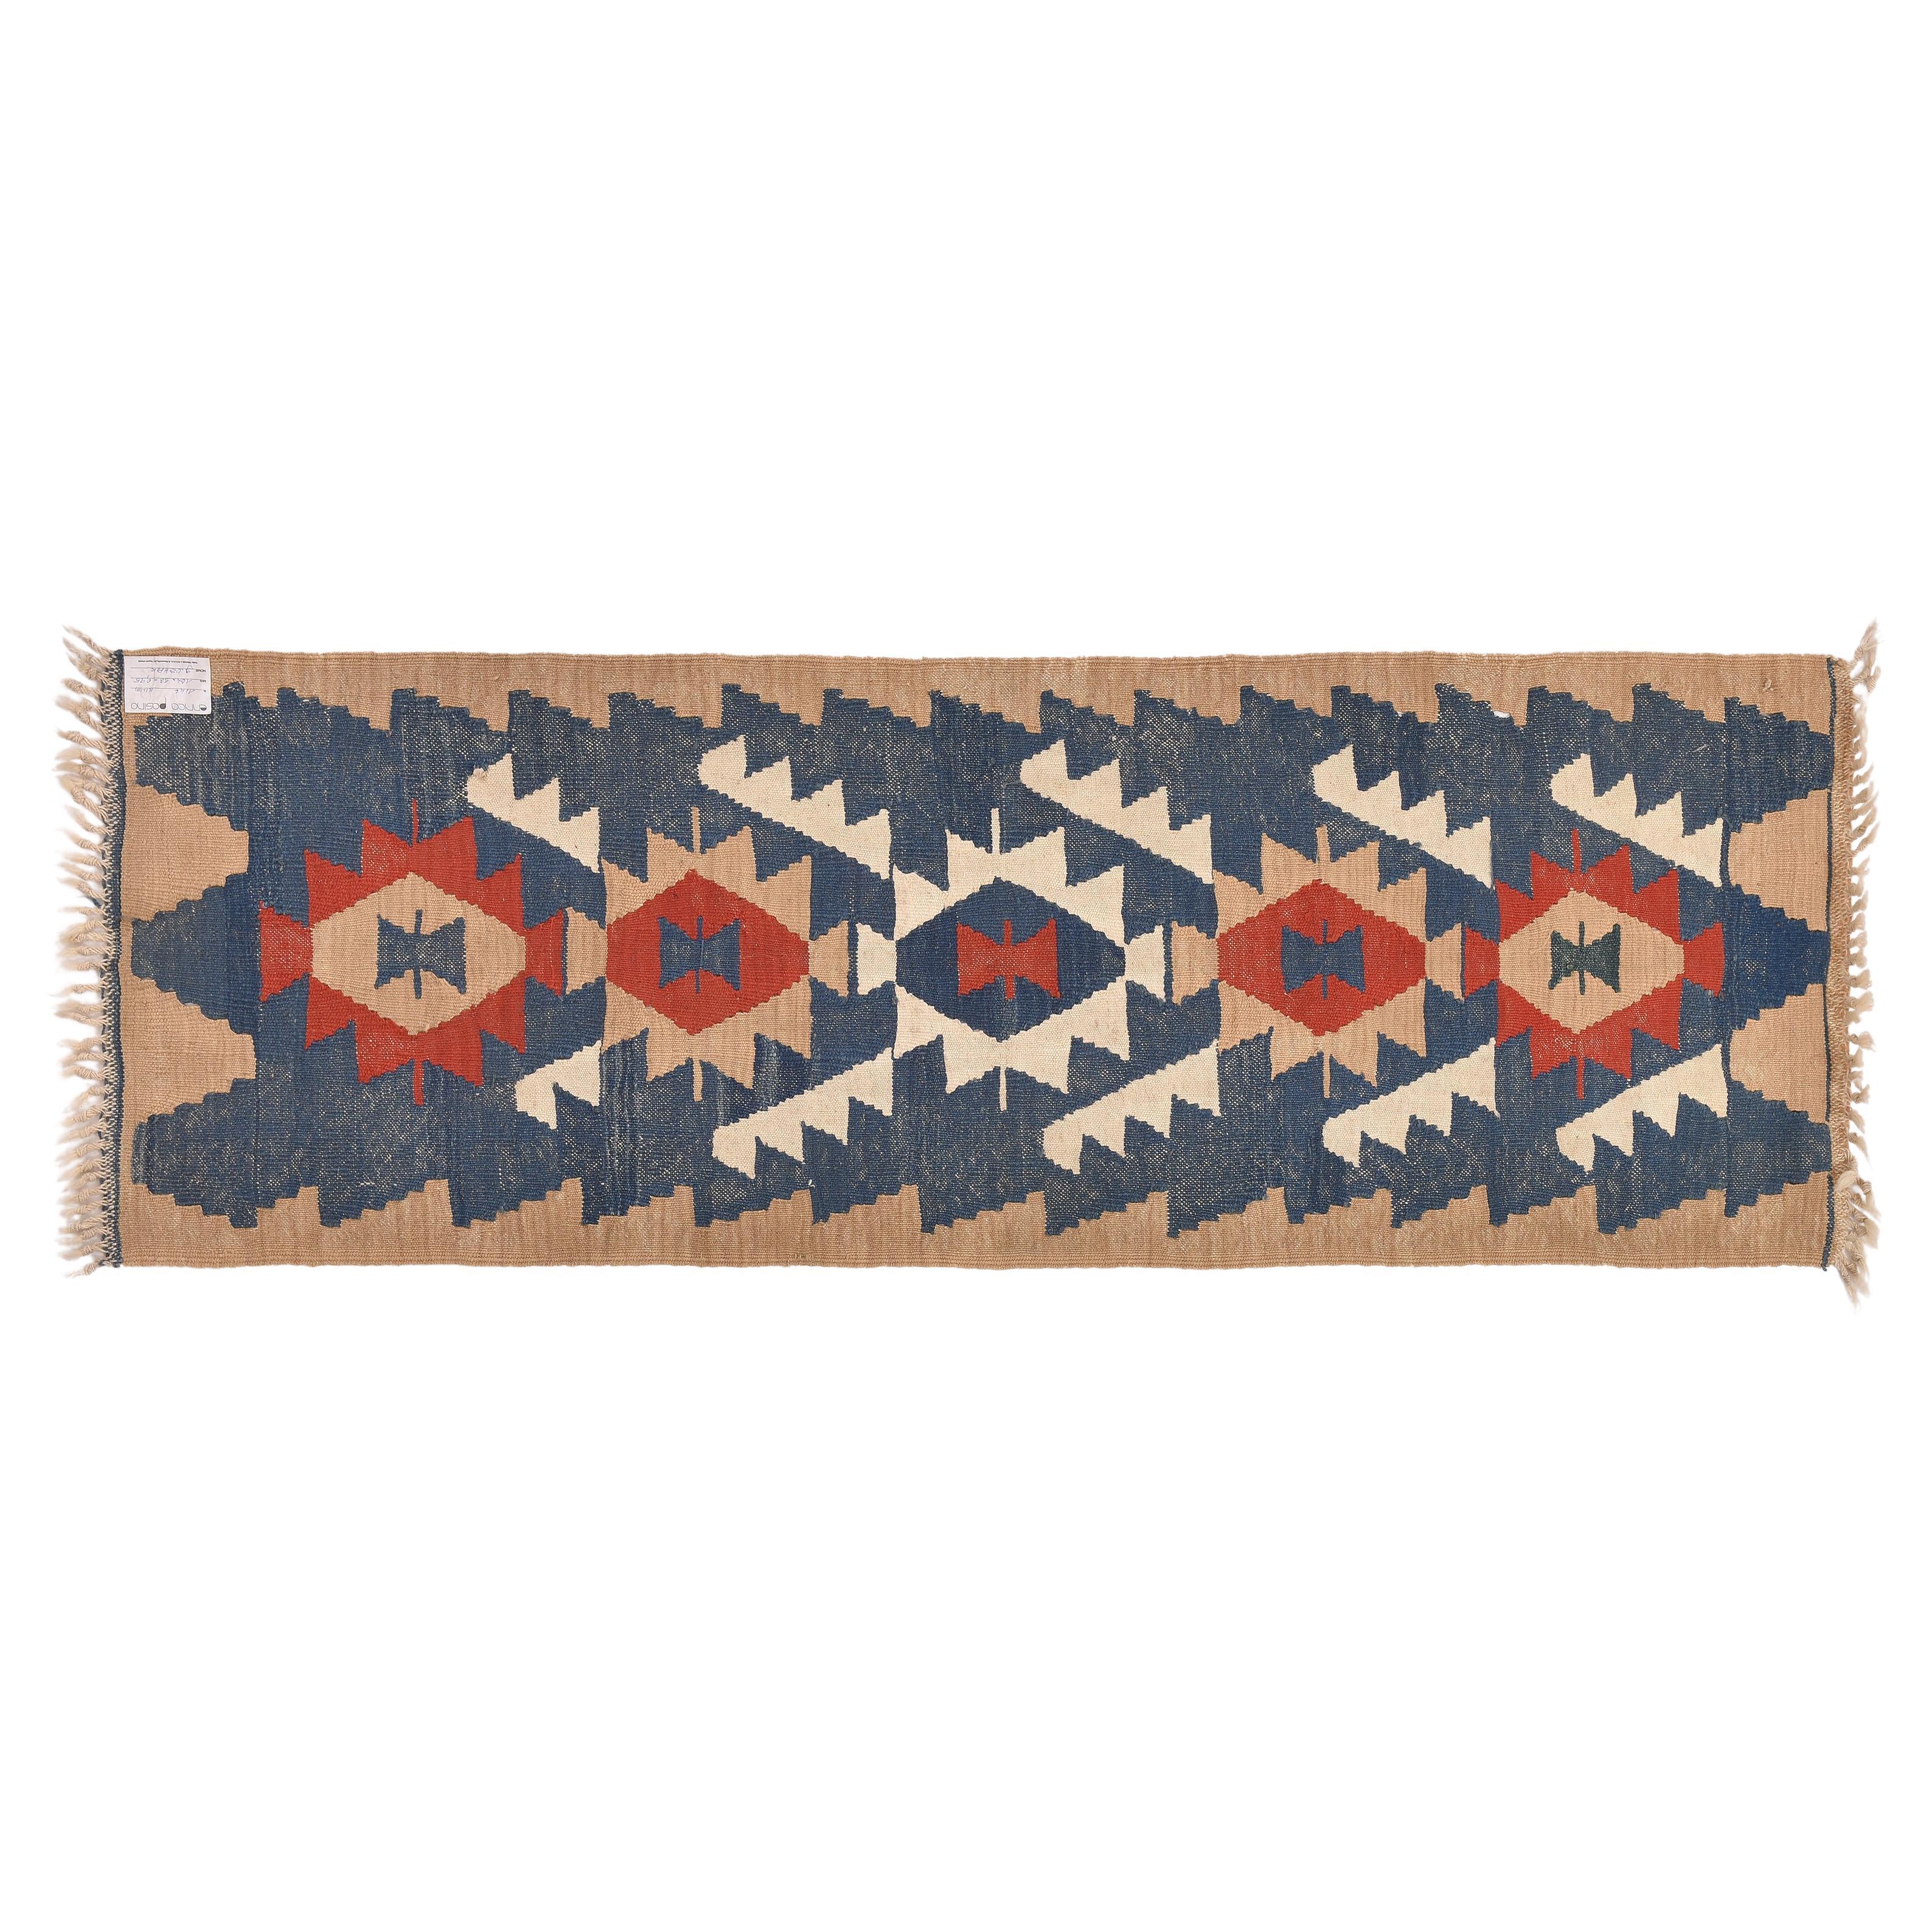 nr. 1147 - Simple kilim runner with good weaving workmanship, easy to set up and use.
Also with a good price.